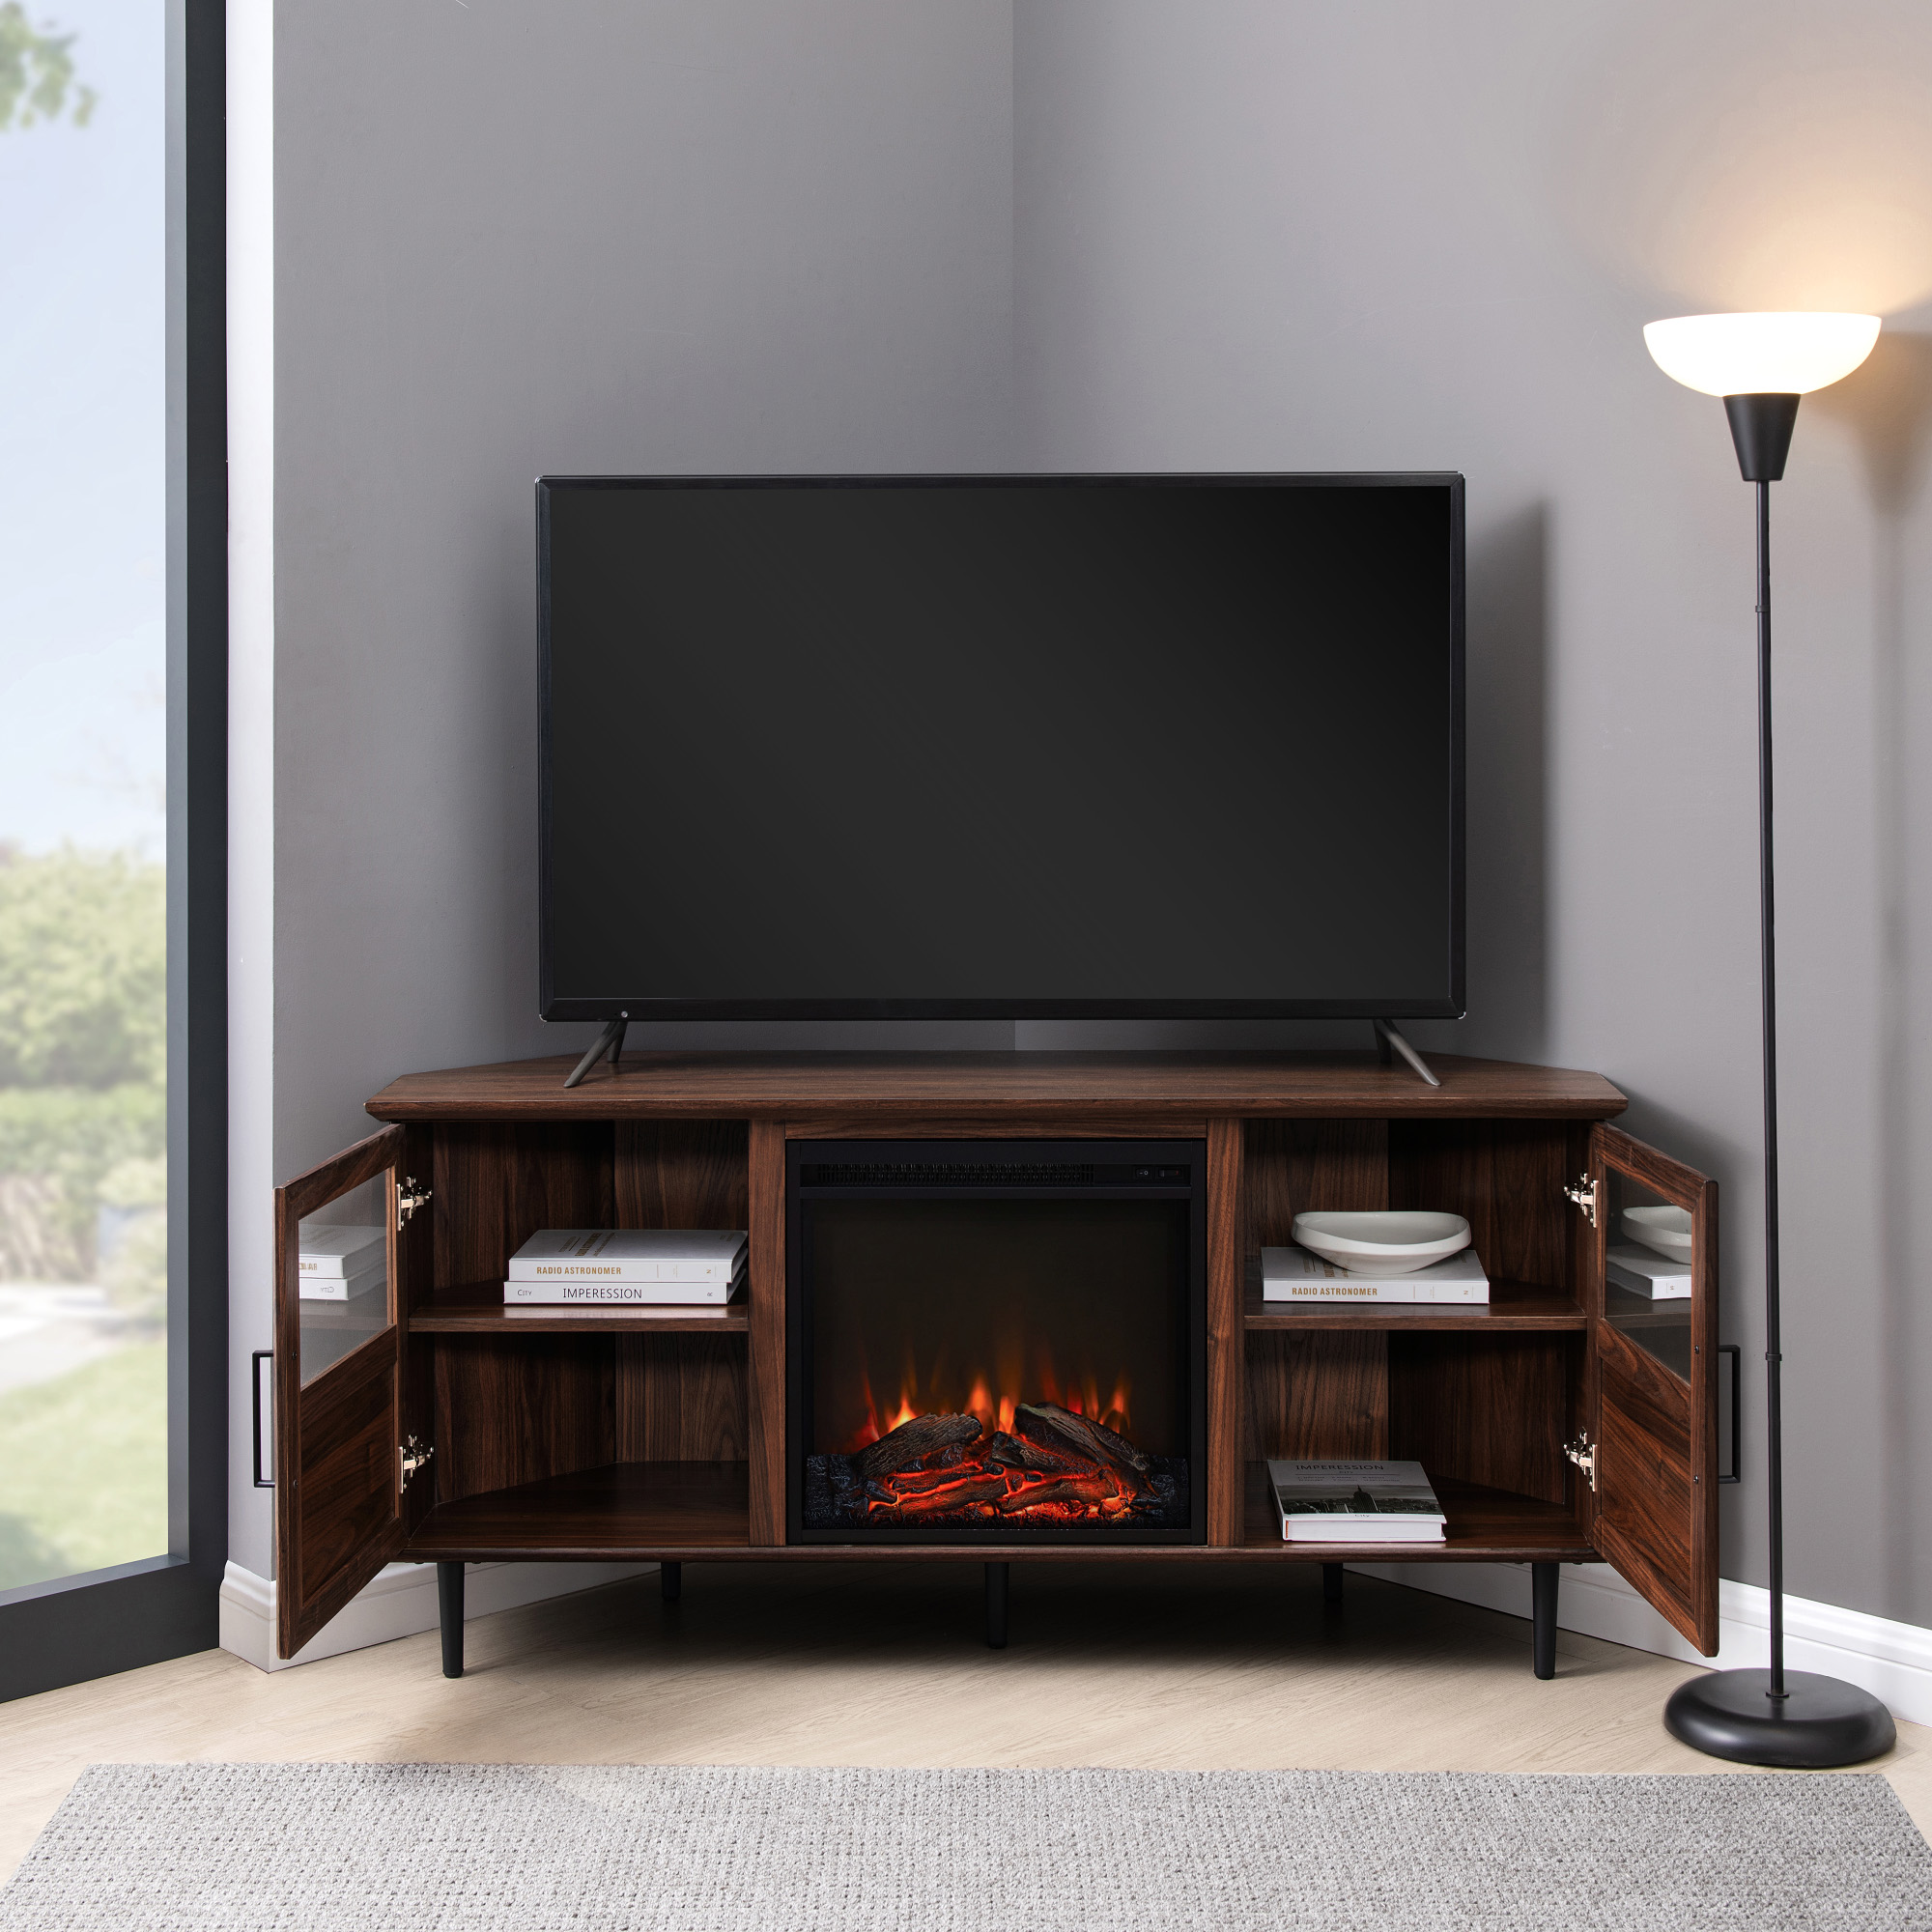 Walker Edison Panel Electric Fireplace Corner TV Stand for TVs up to 60”, Dark Walnut - image 3 of 11